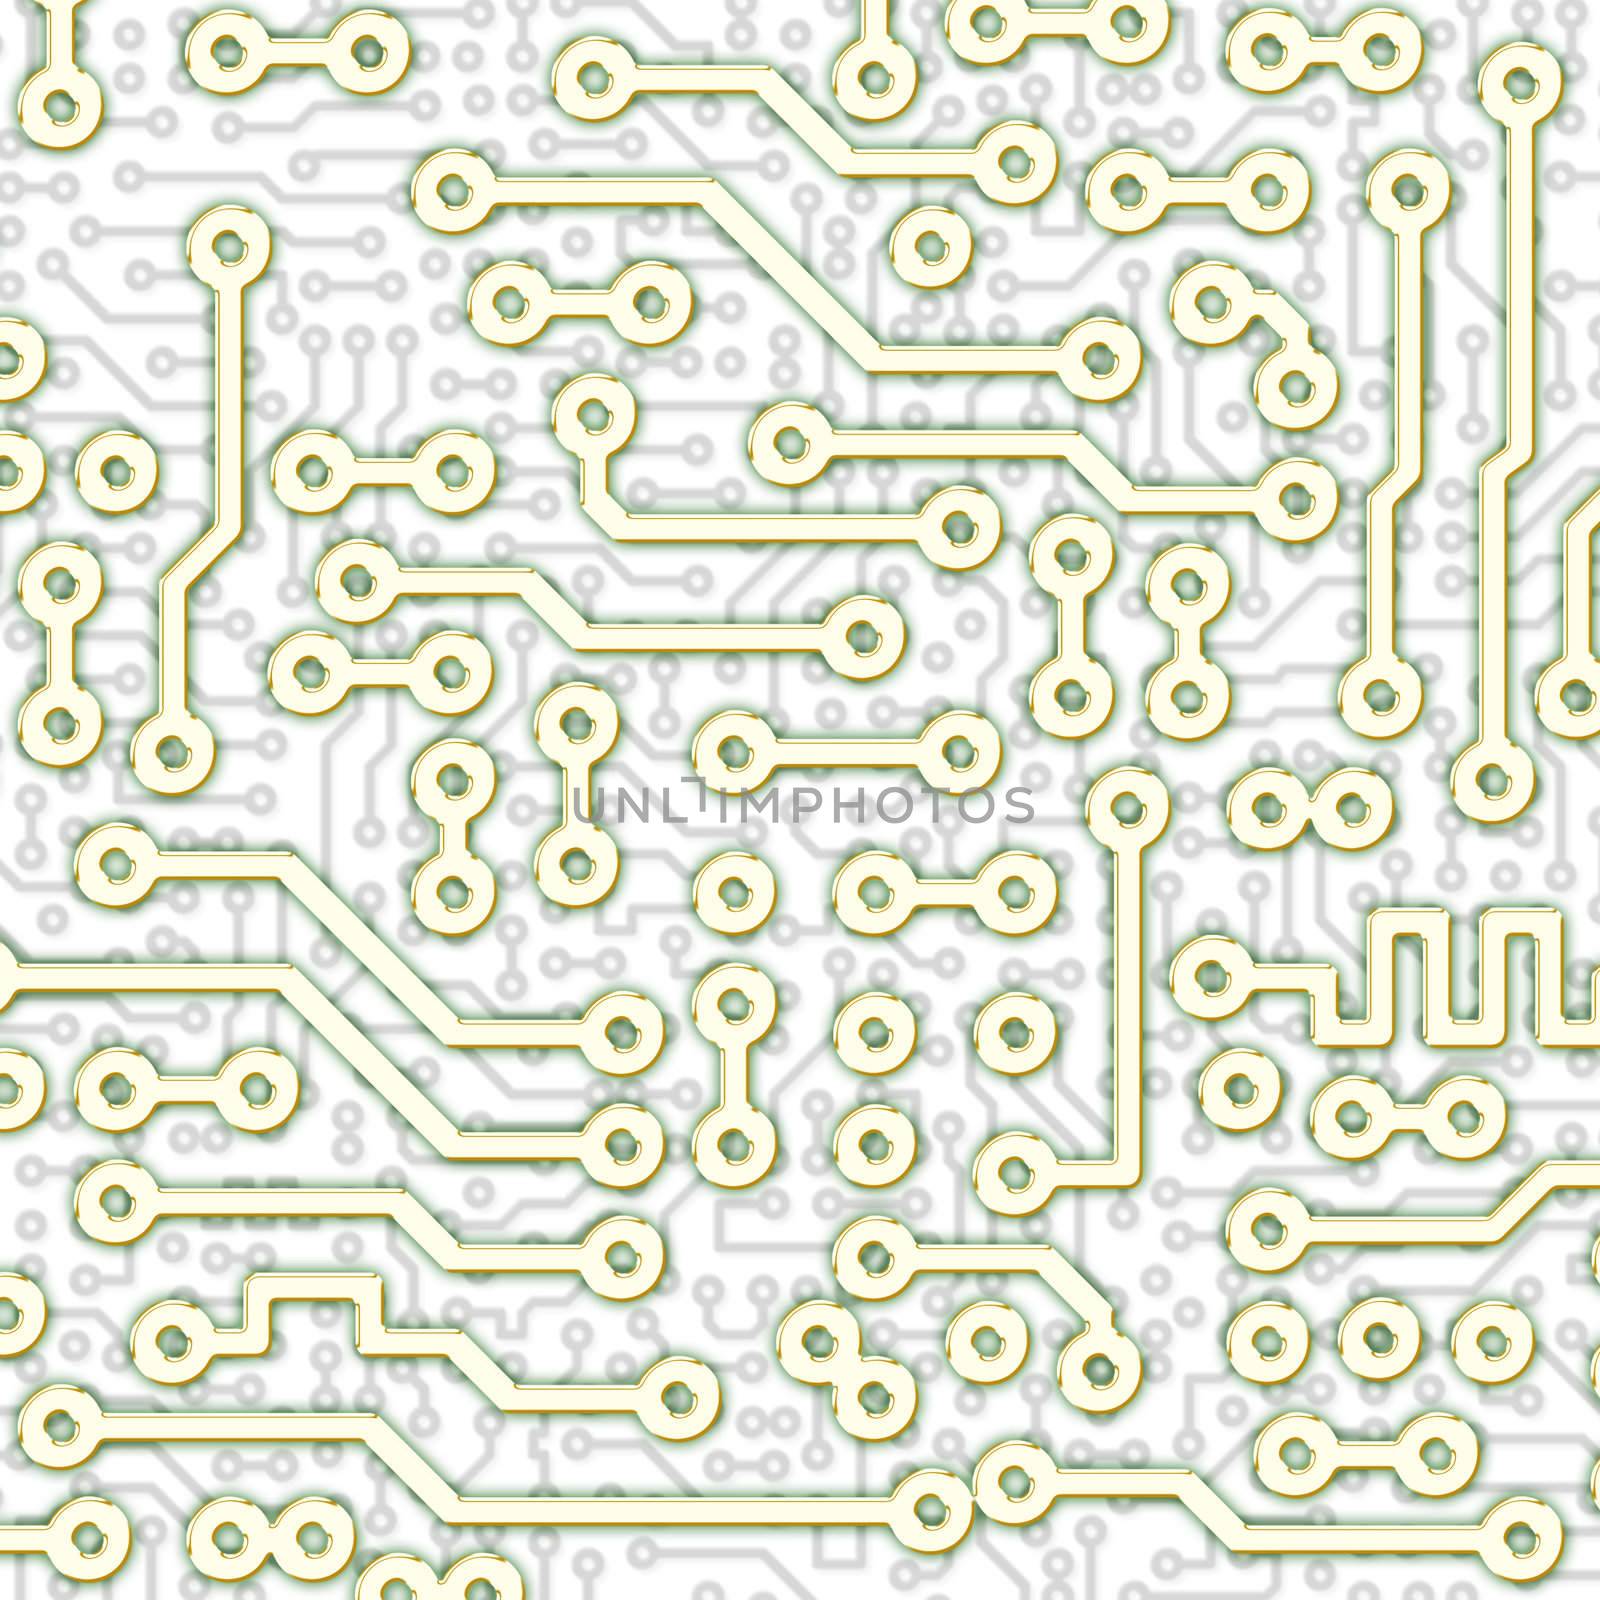 Abstract graphical circuit board light pattern by pzaxe